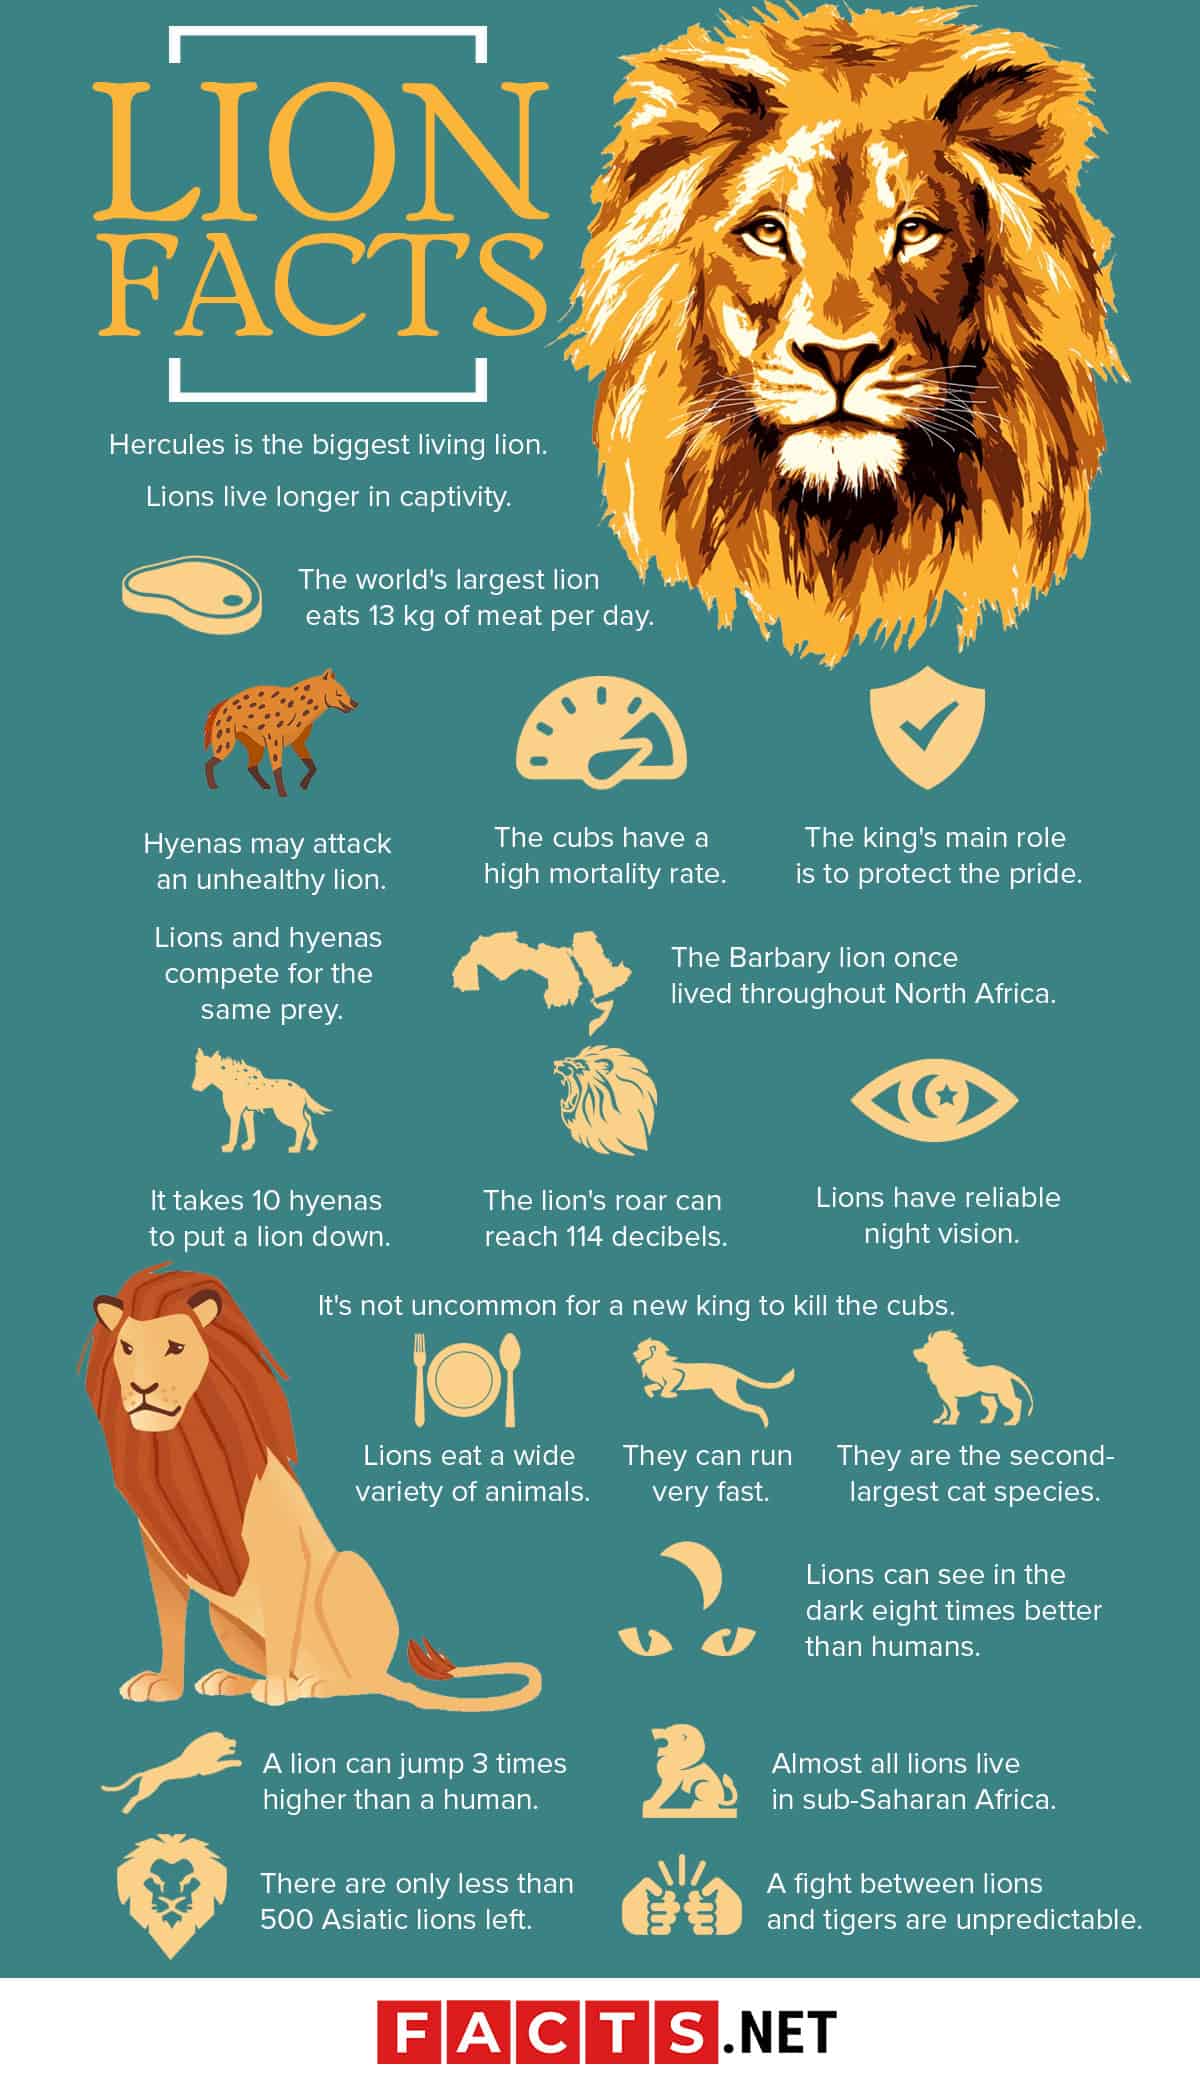 The significant of Lion's roar and why it is similar to human